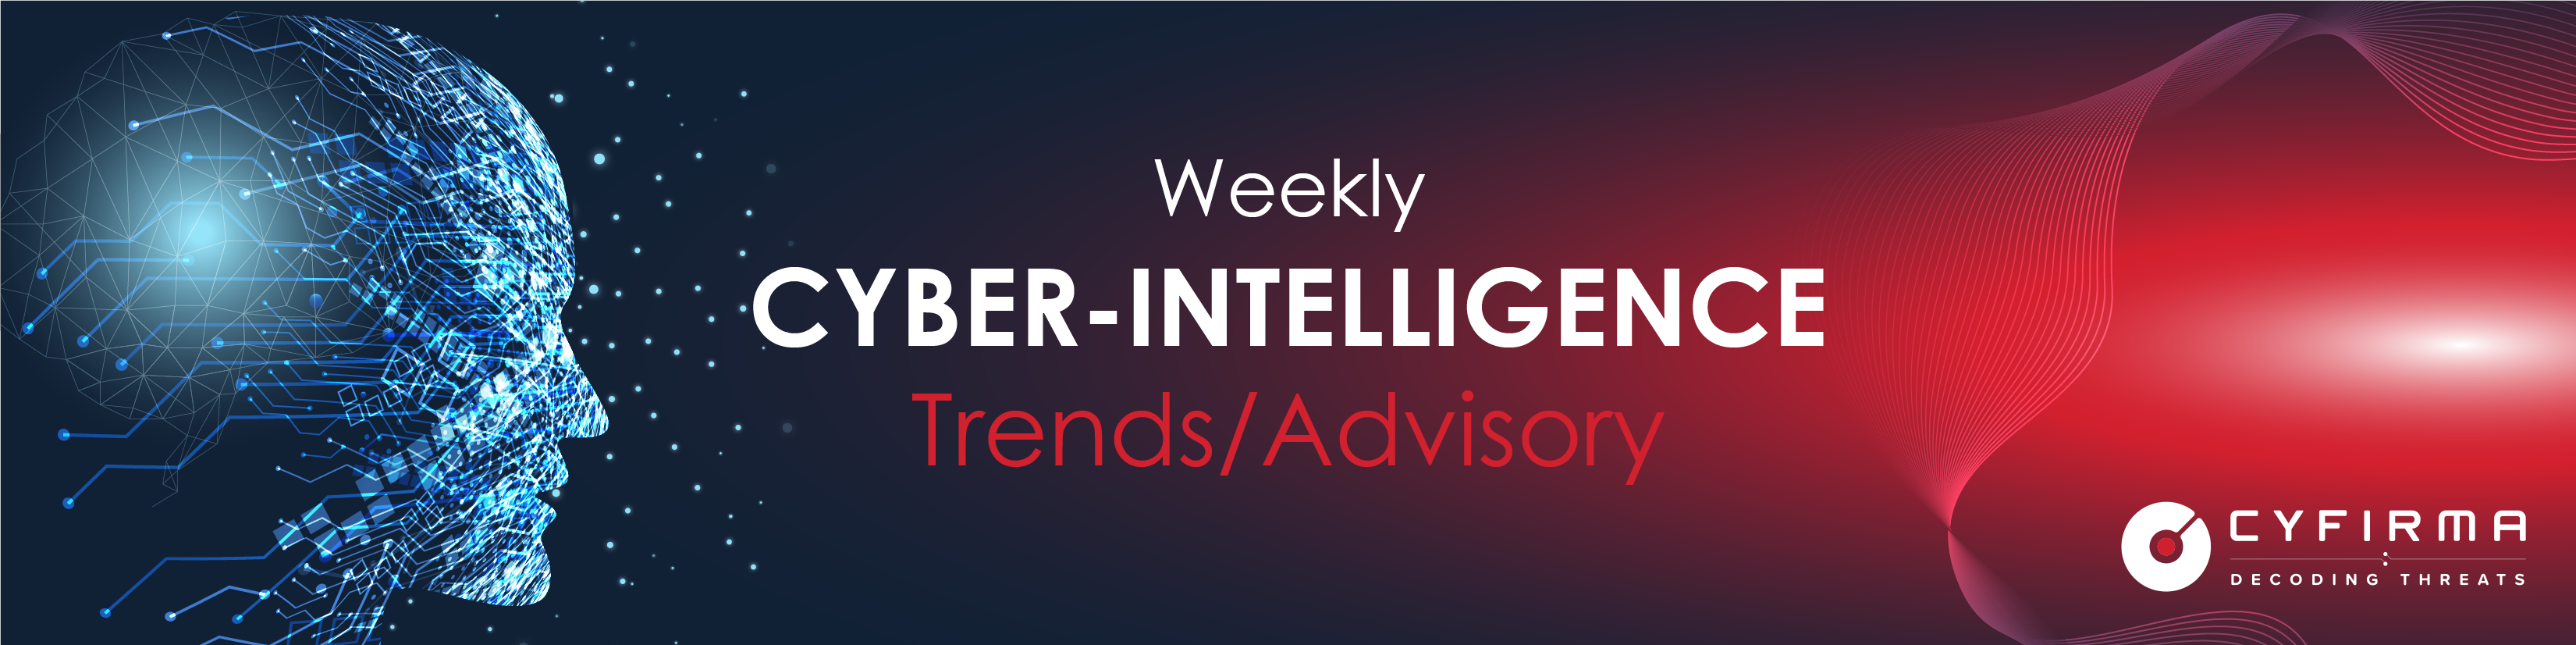 Weekly Cyber-Intelligence Trends and Advisory – 25 Feb 2022